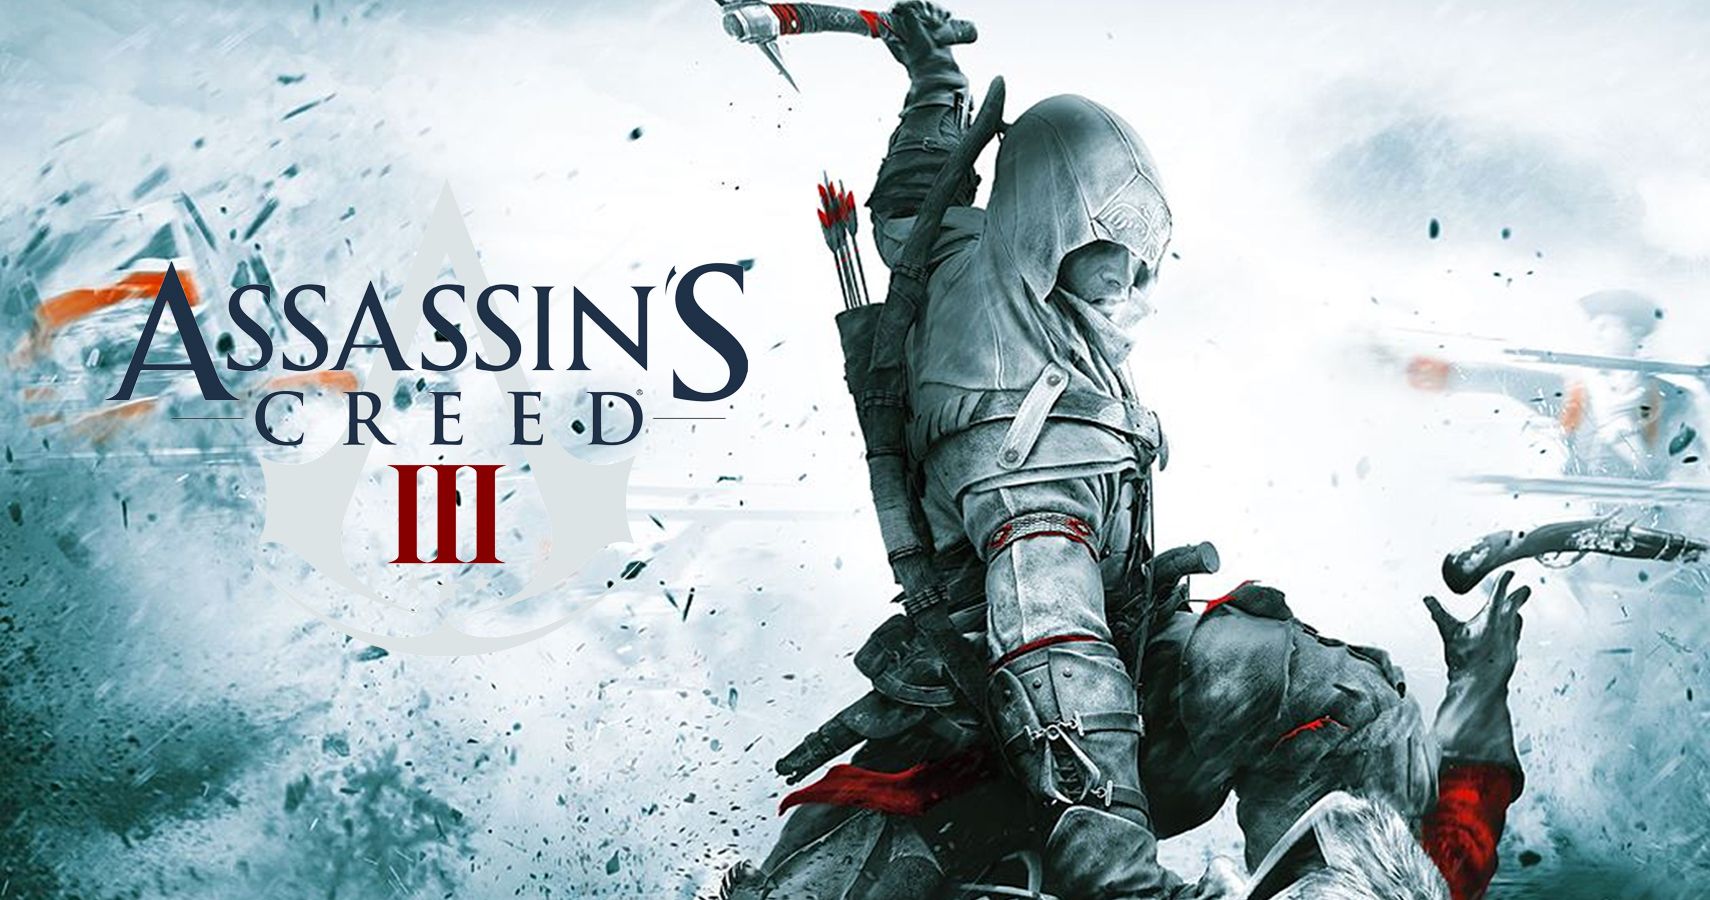 Assassin creed uplay steam